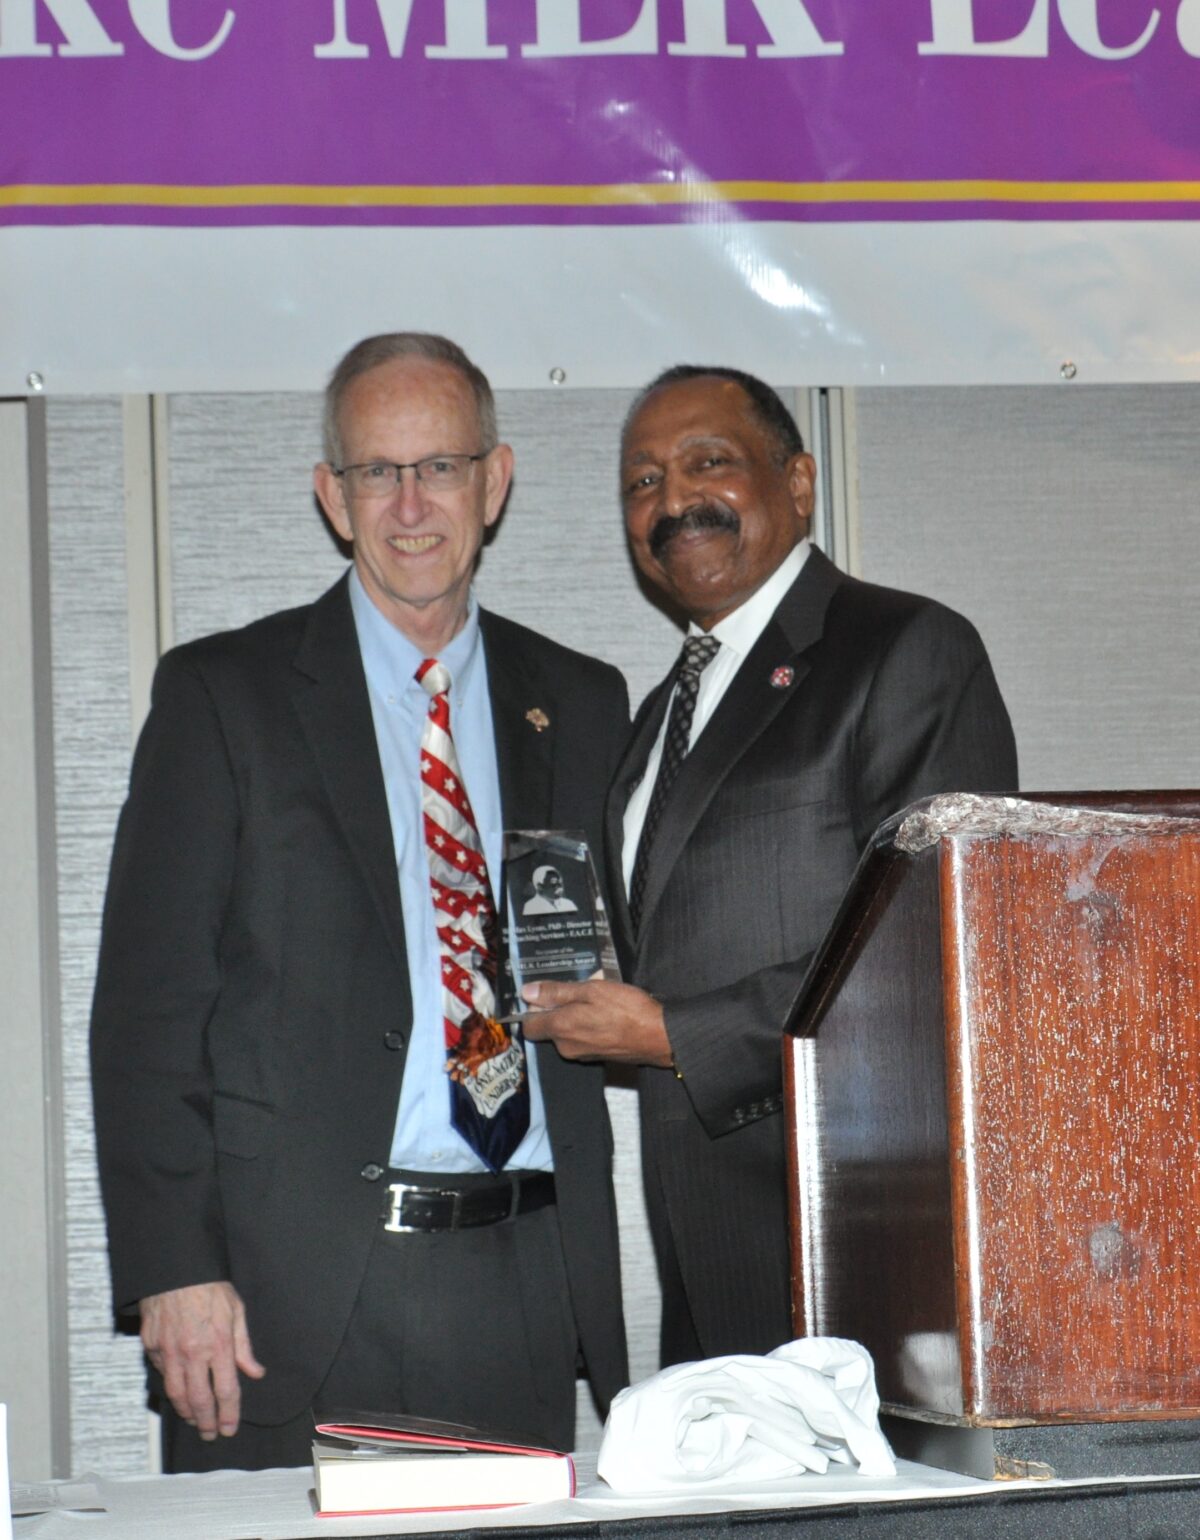 Dr. Max Lyons honored at MLK Event